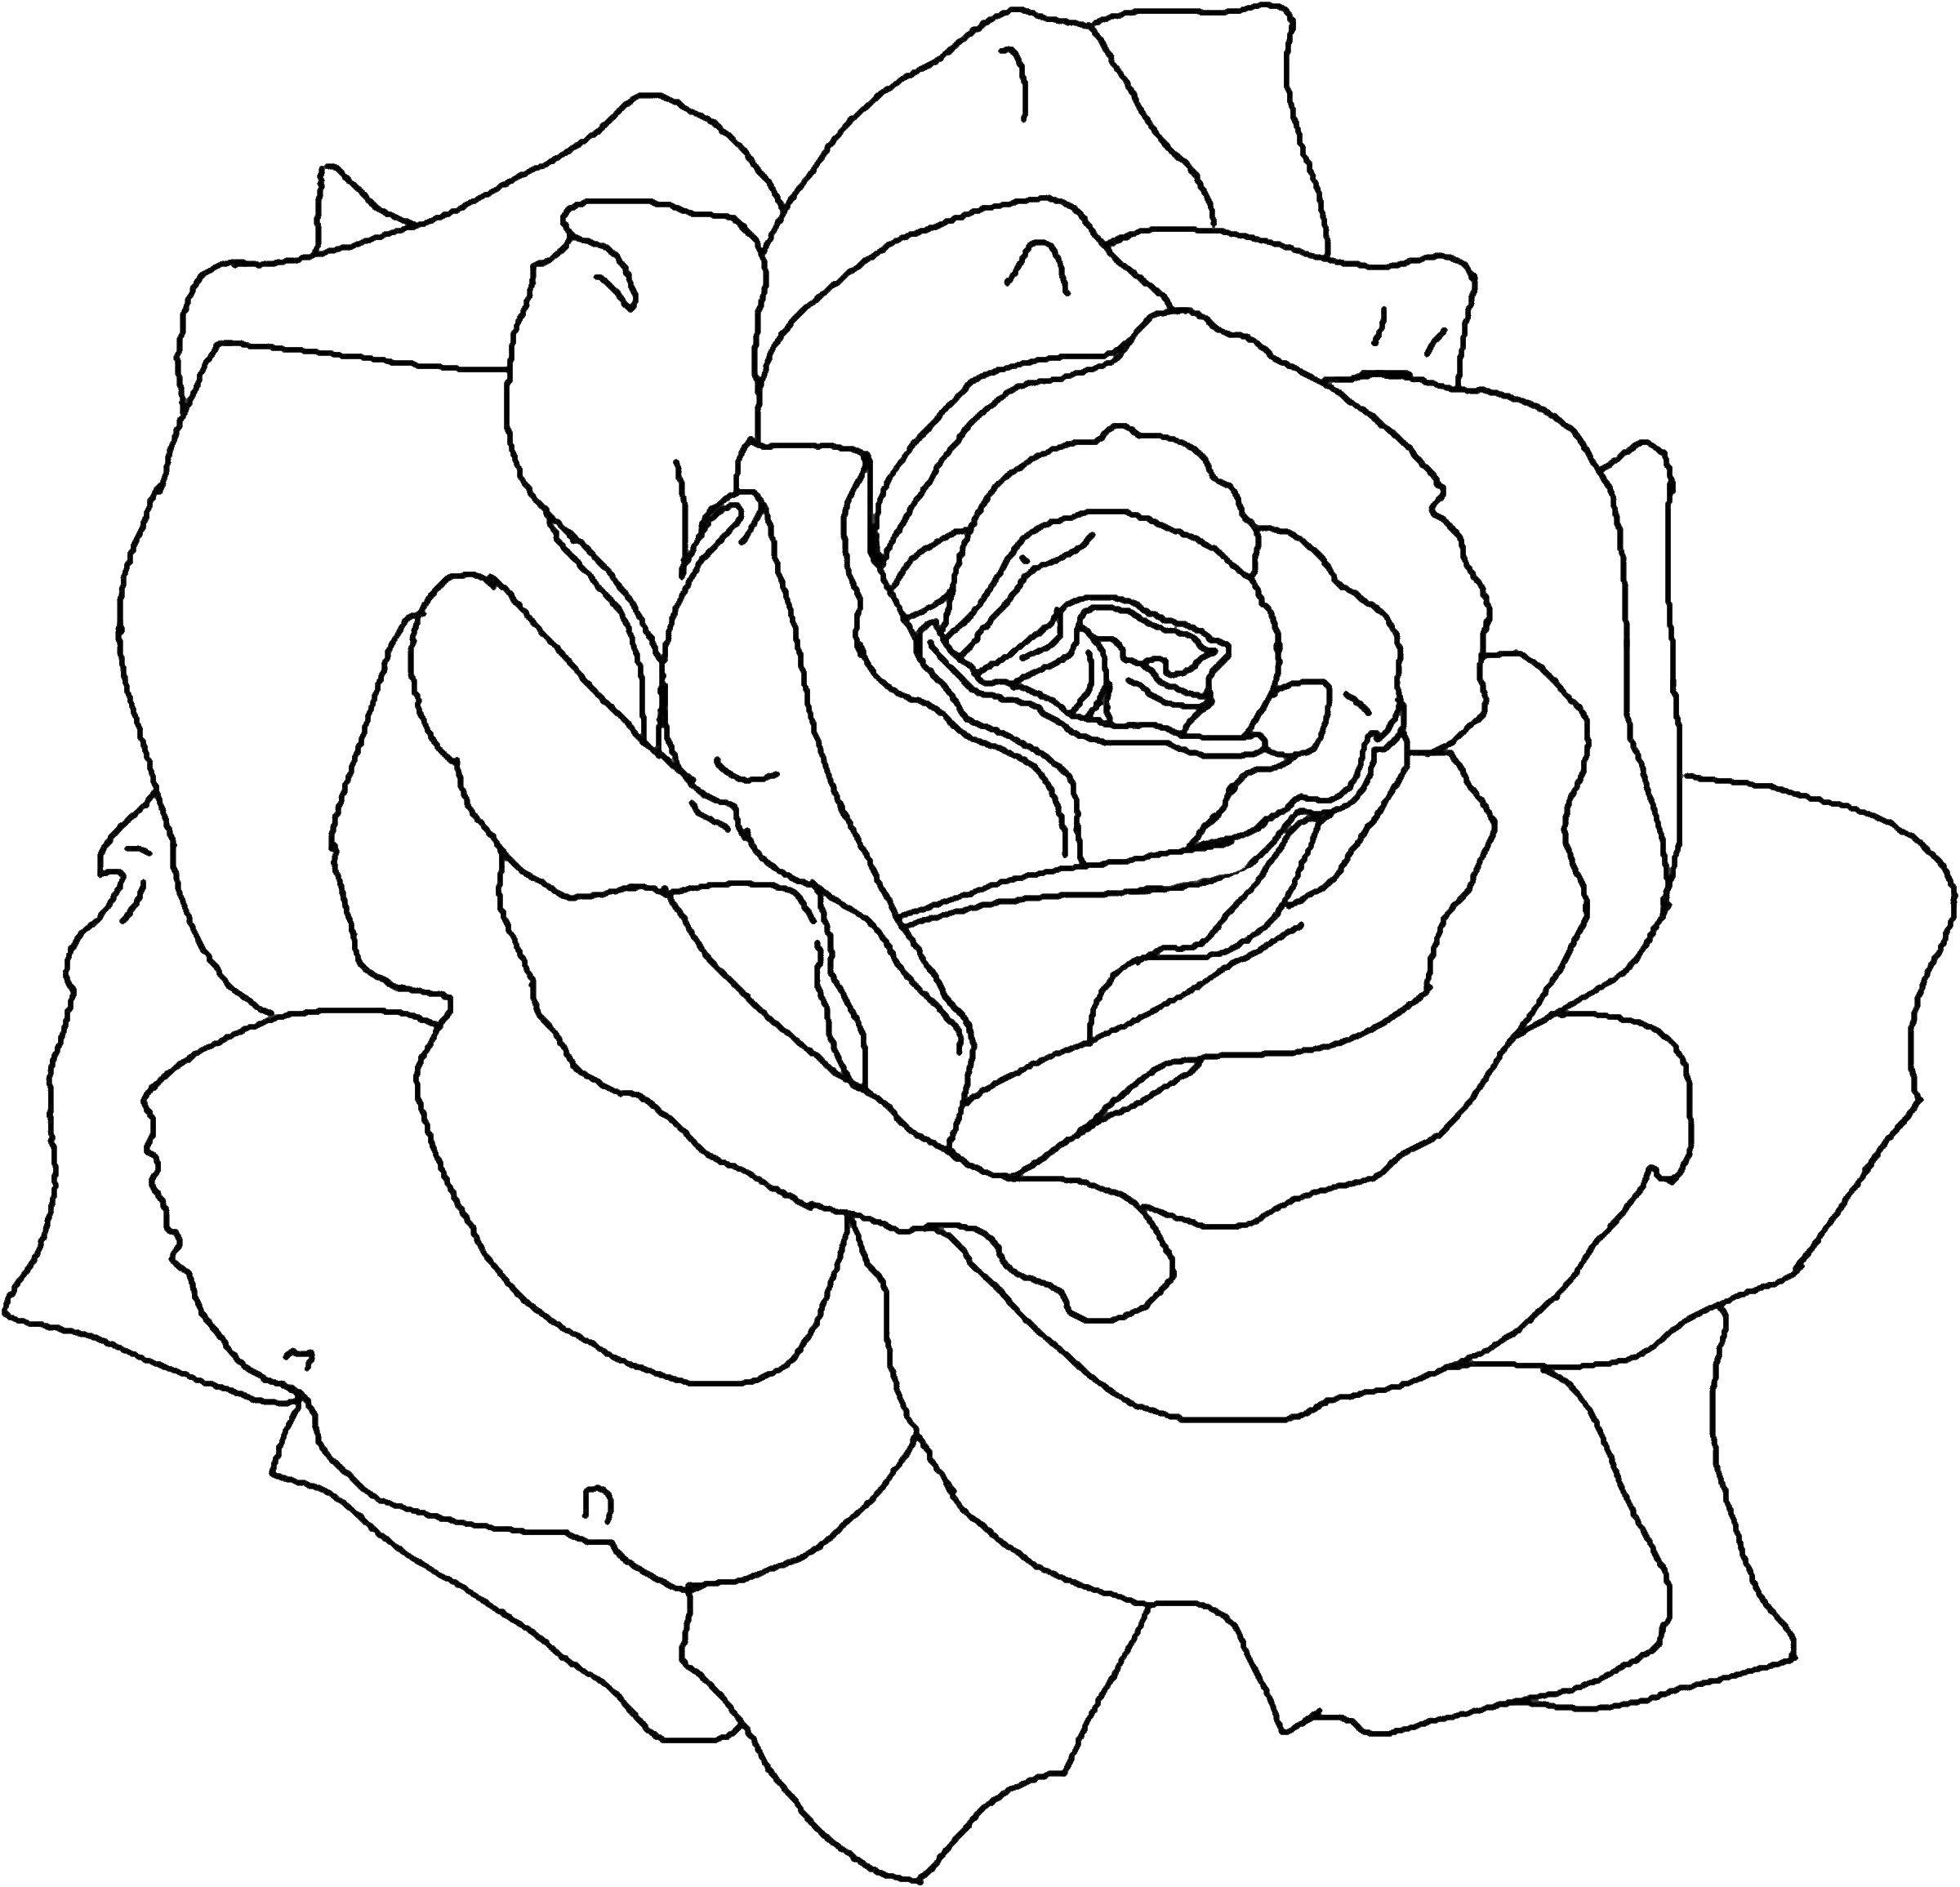 Coloring Lush rose.. Category Flowers. Tags:  Flowers, roses.